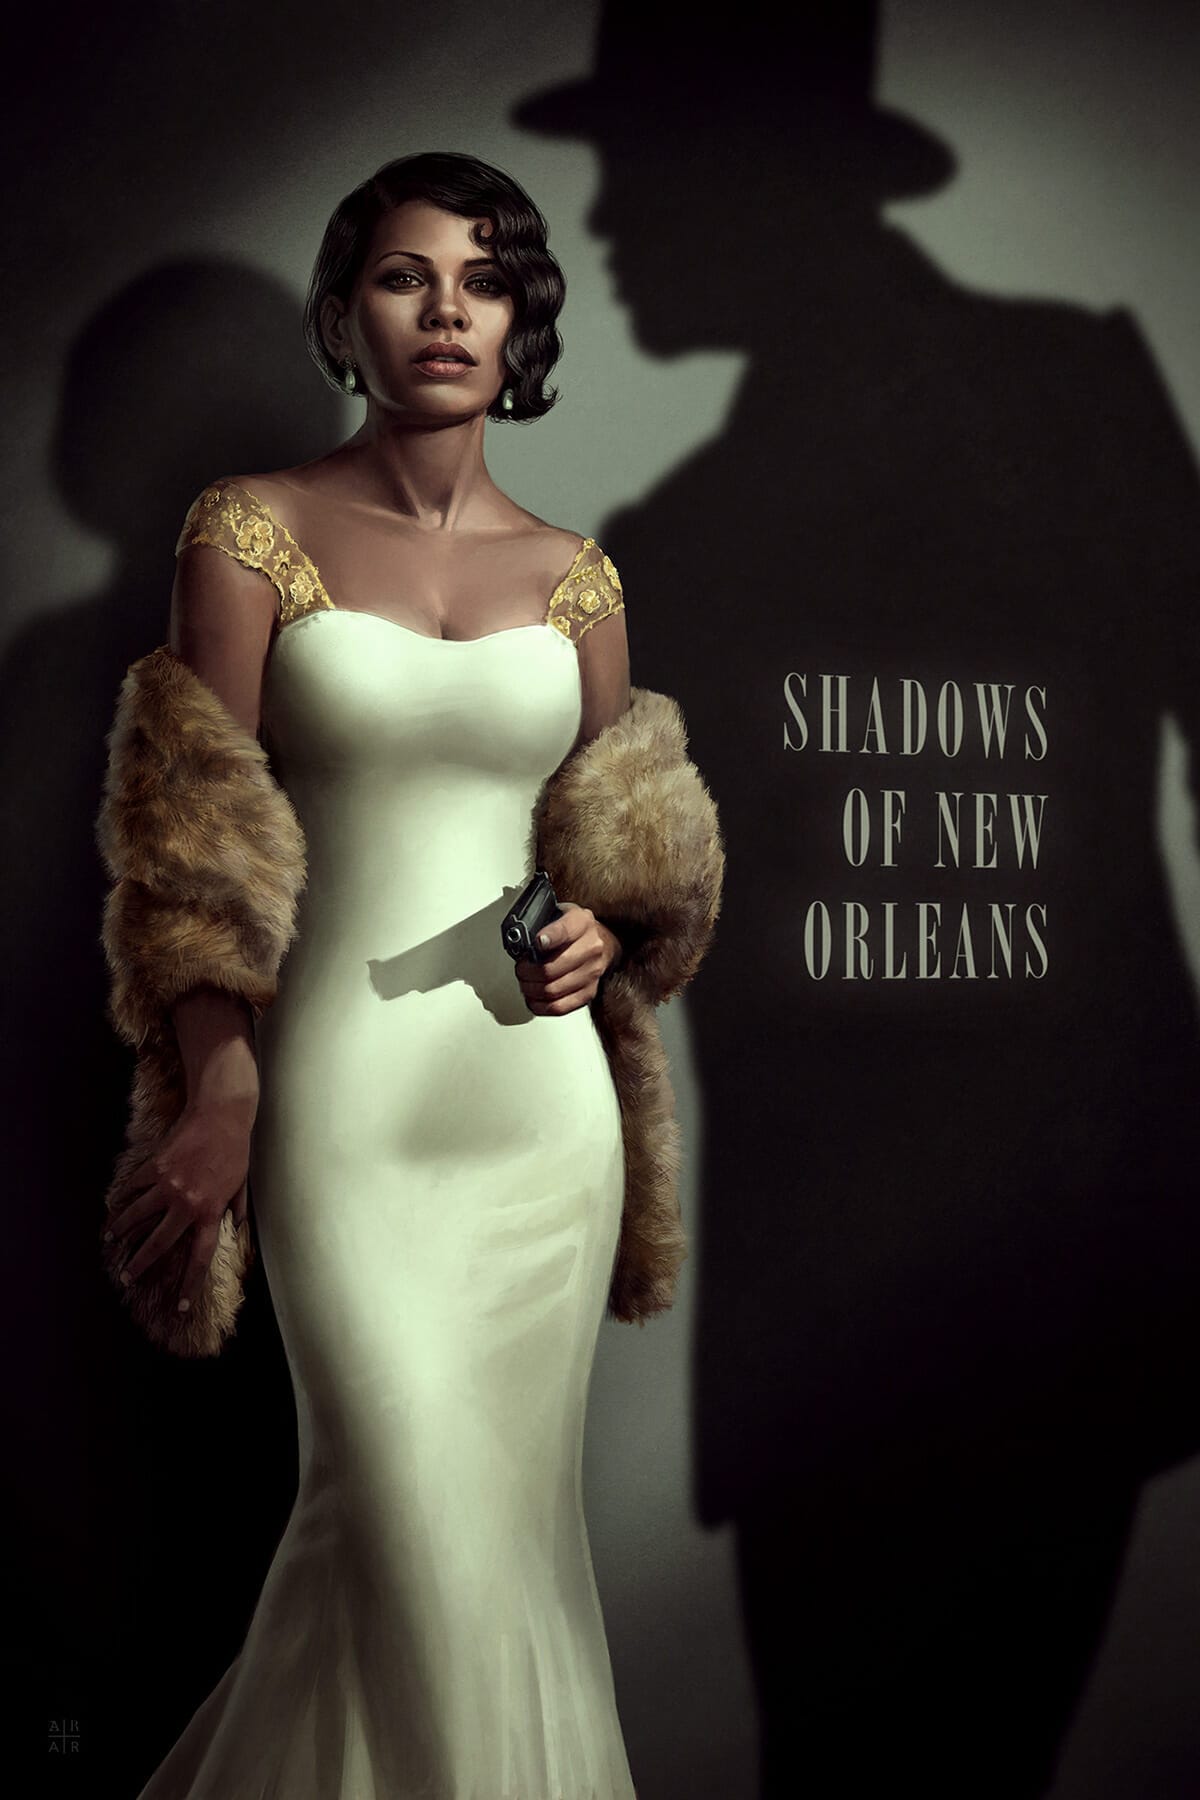 Shadows of New Orleans